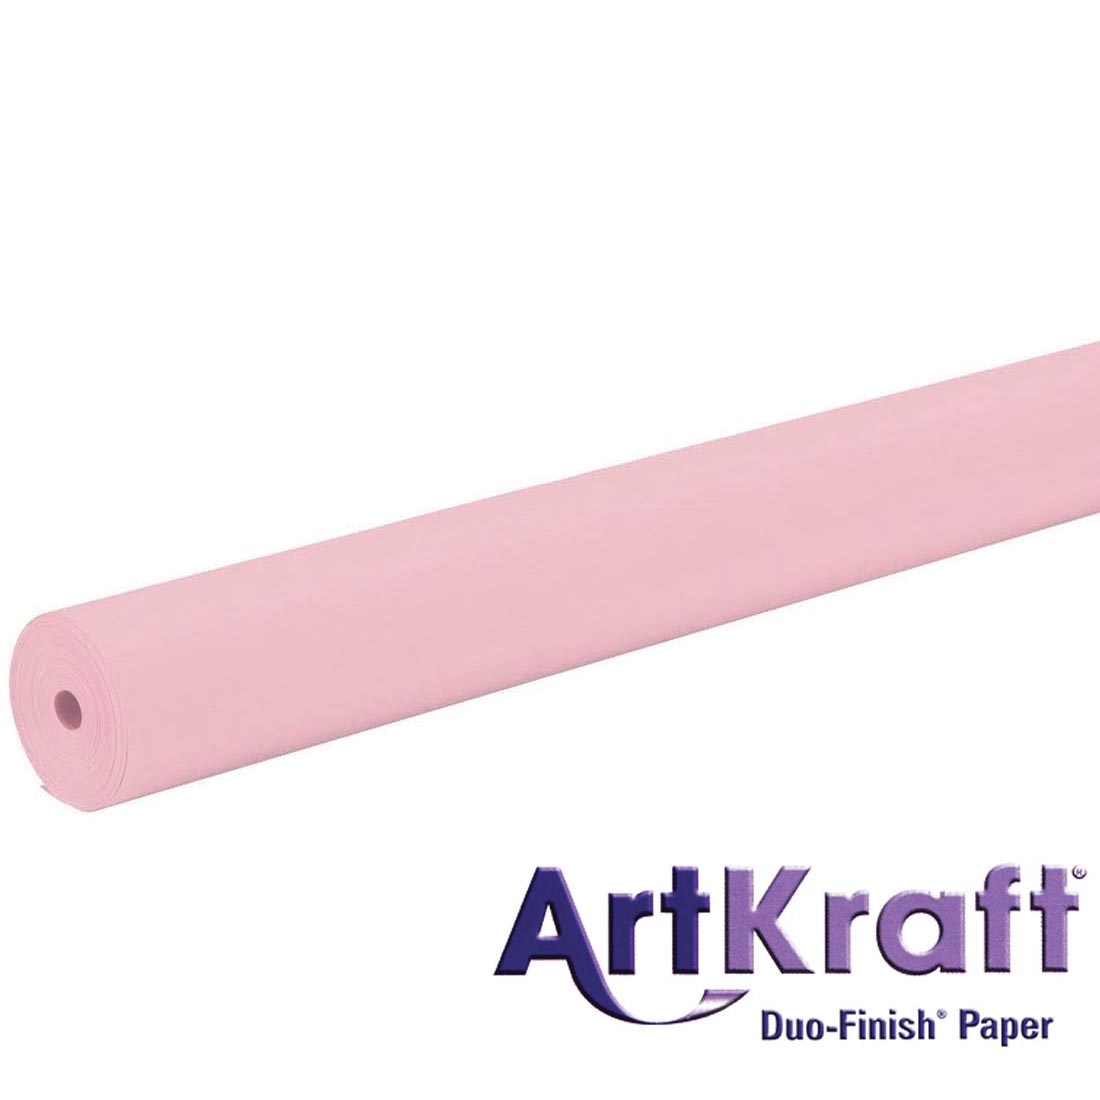 Roll of Pink Paper with text ArtKraft Duo-Finish Paper